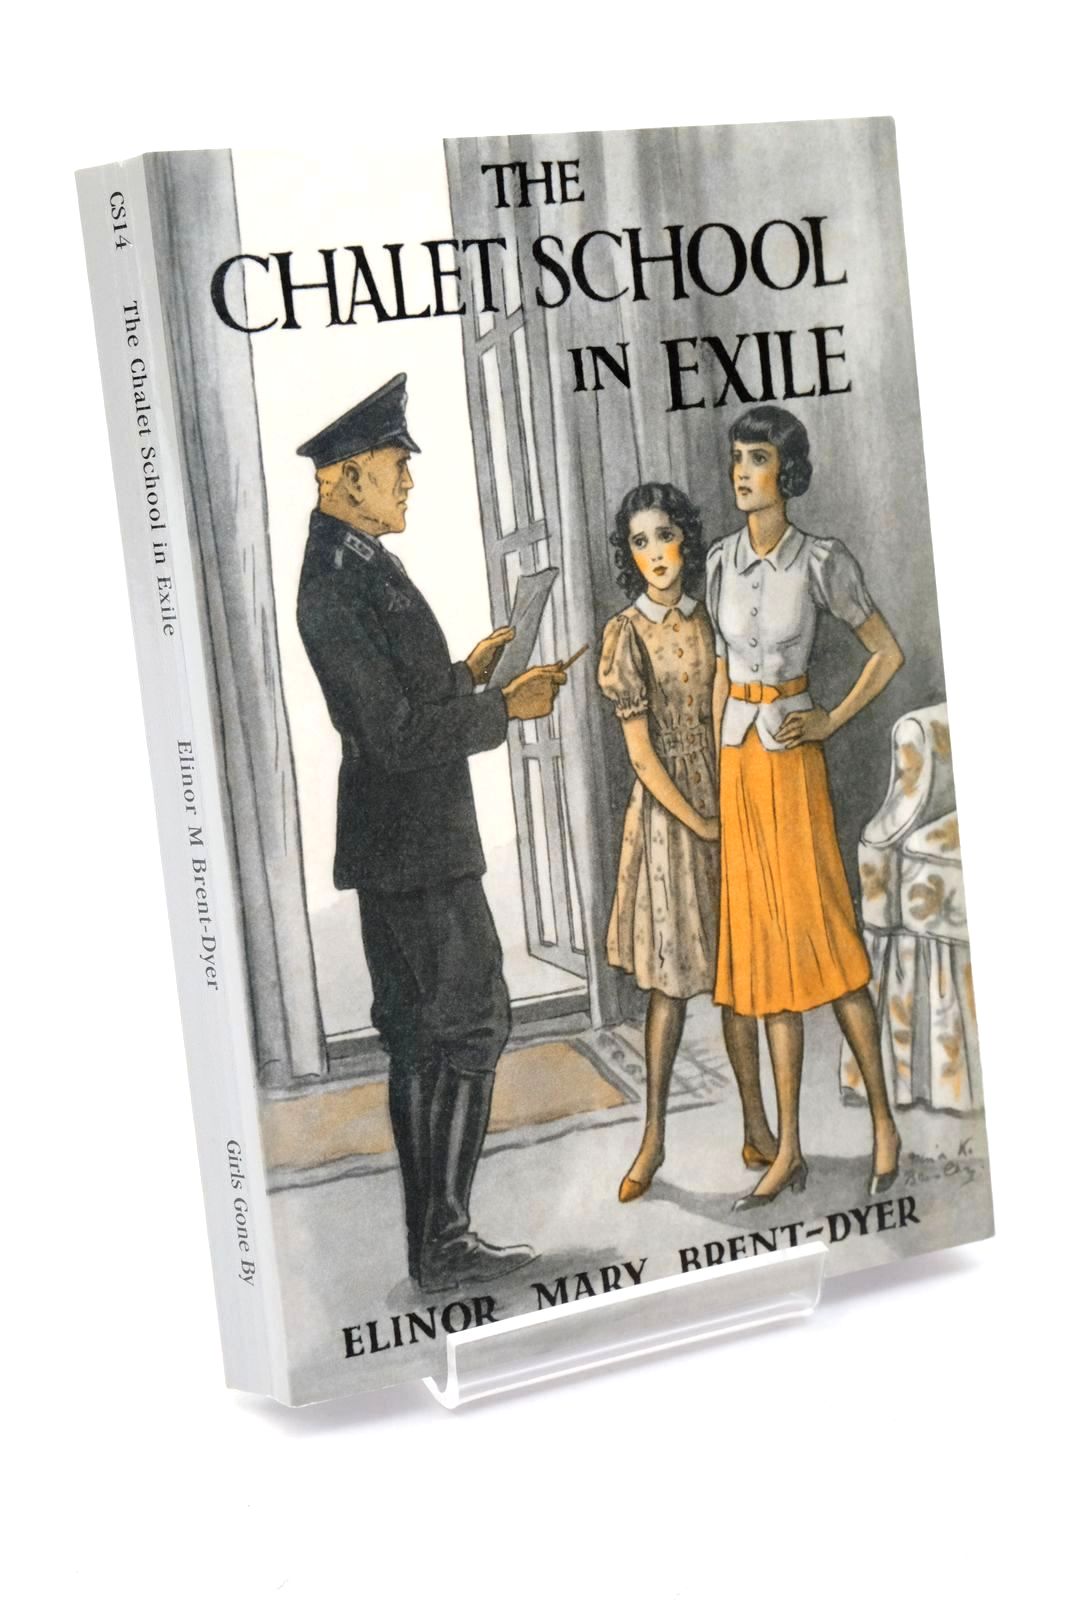 Photo of THE CHALET SCHOOL IN EXILE written by Brent-Dyer, Elinor M. illustrated by Brisley, Nina K. published by Girls Gone By (STOCK CODE: 1322563)  for sale by Stella & Rose's Books